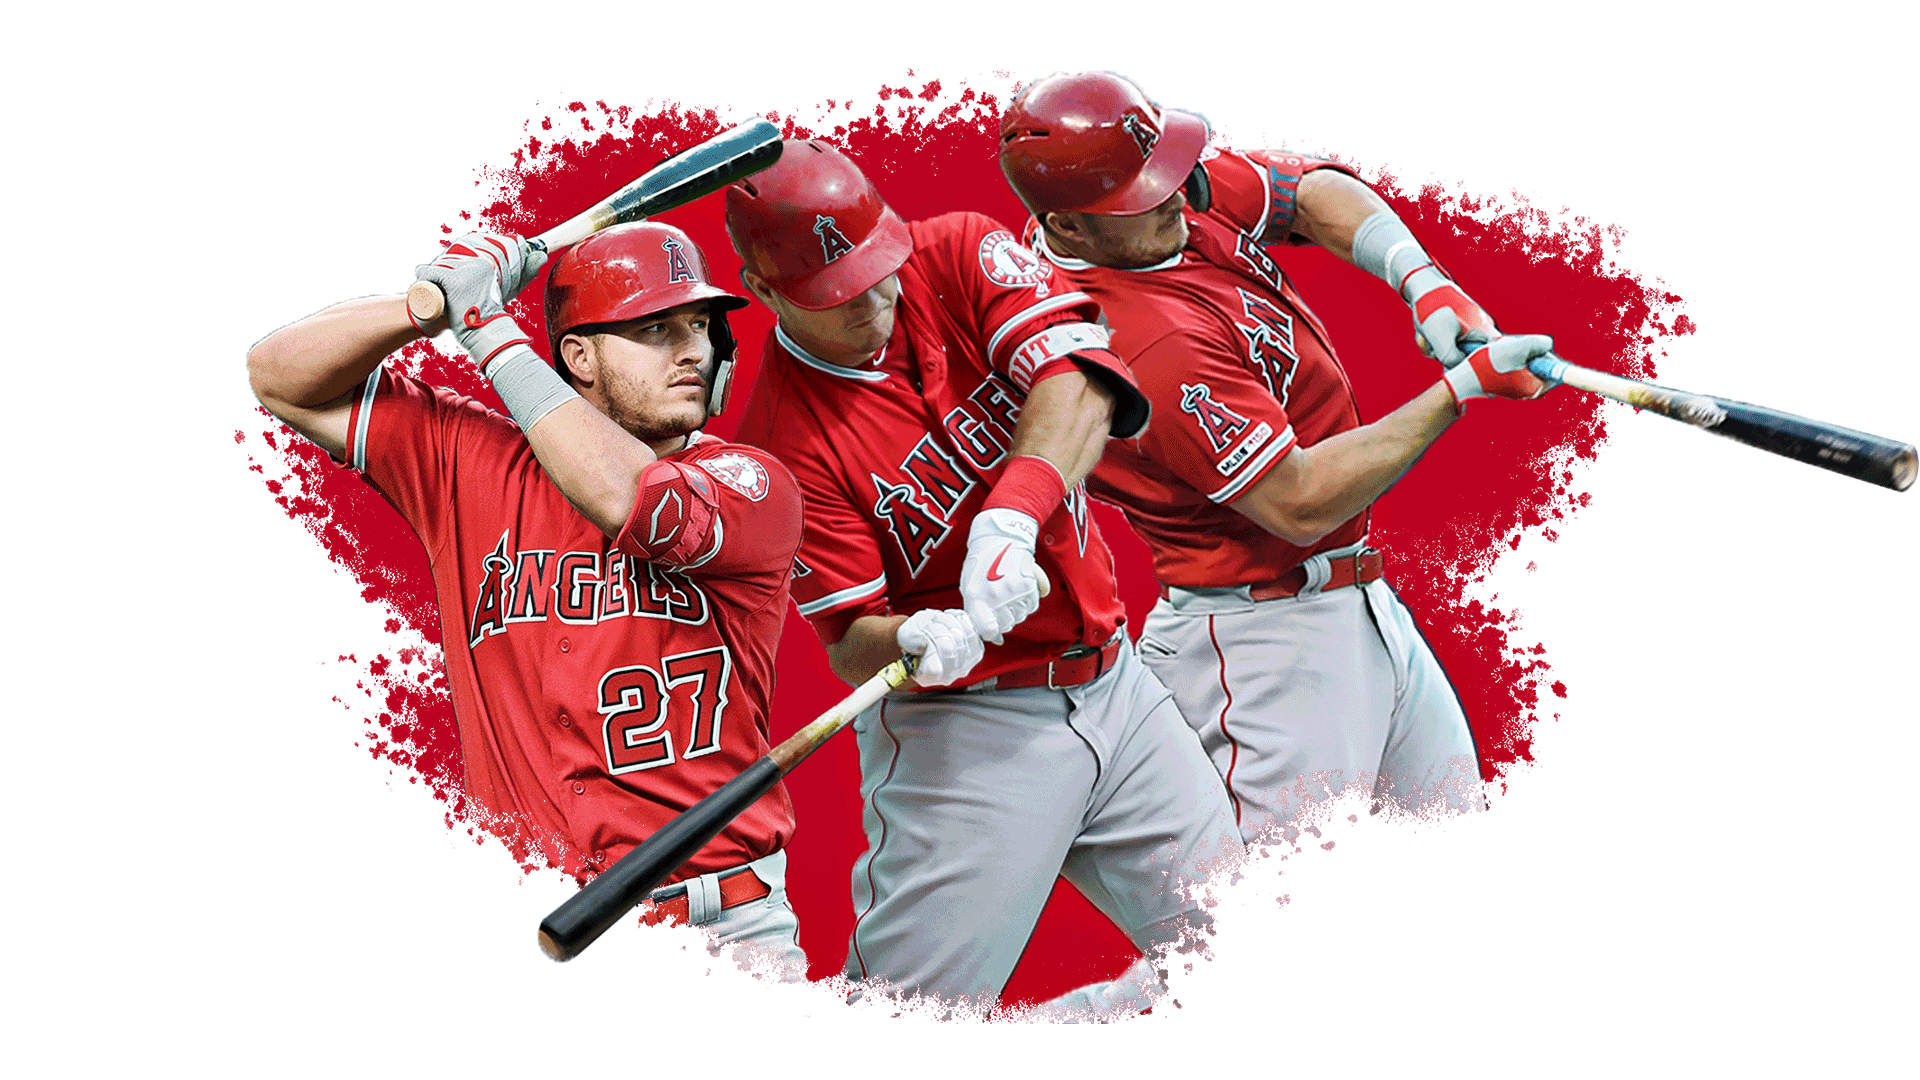 Mike Trout Wallpapers HD 